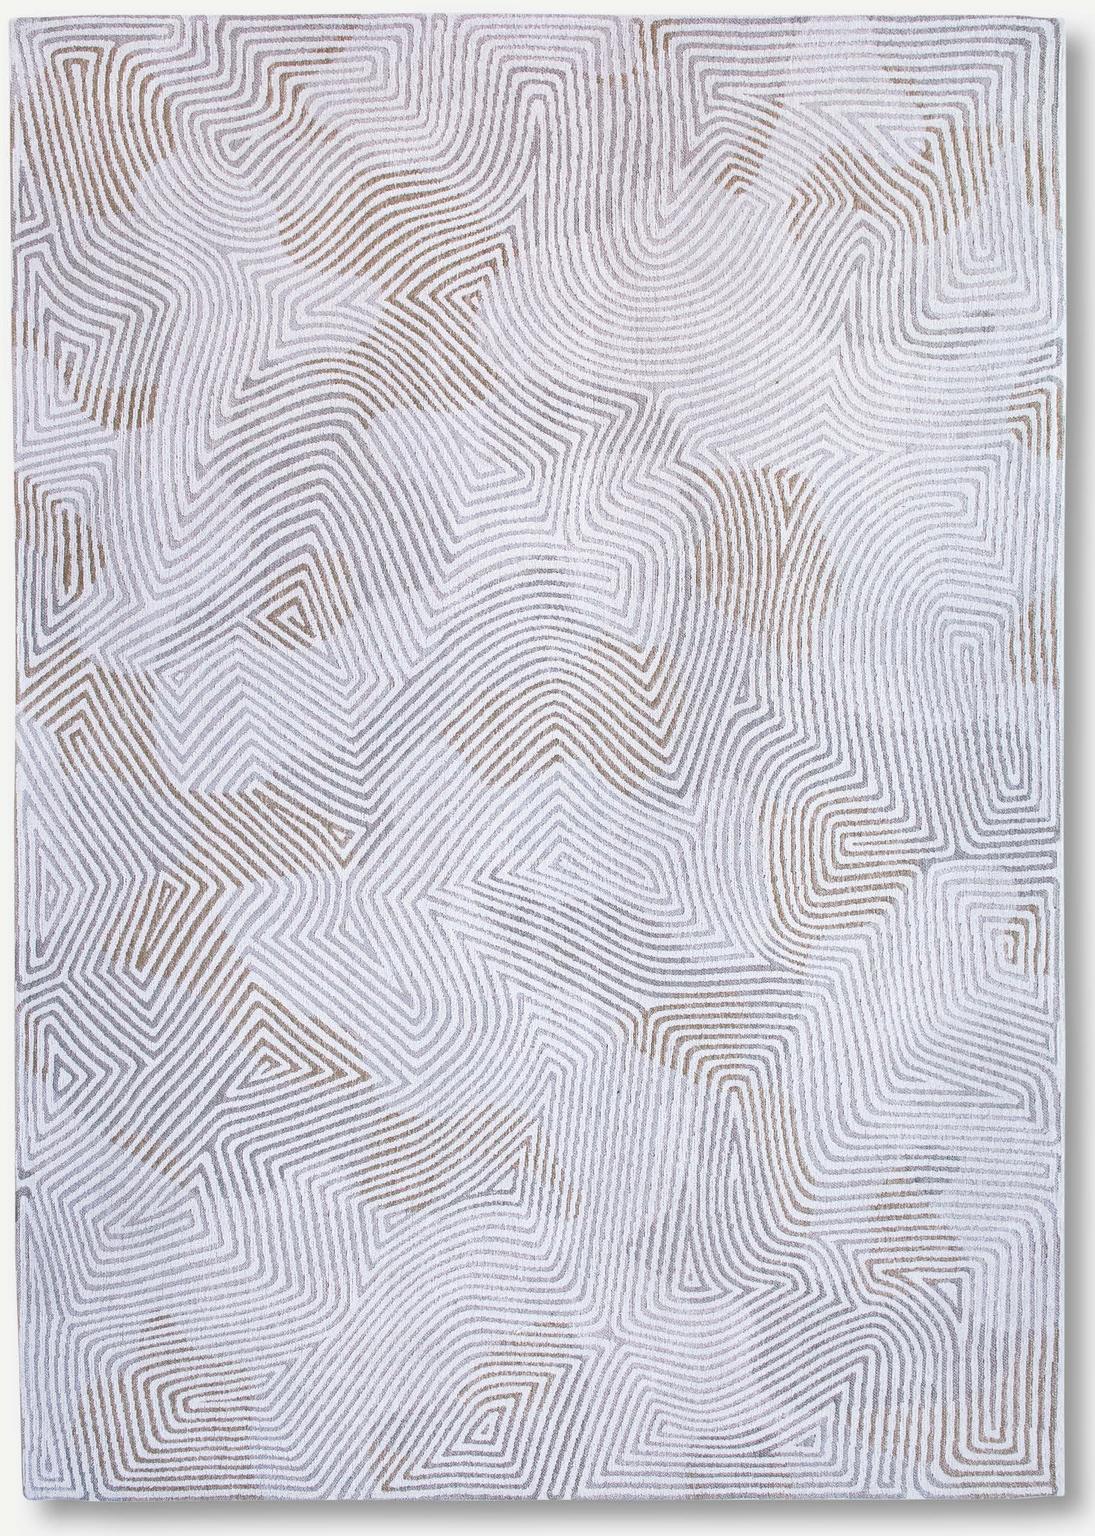 White Flatwoven Rug ☞ Size: 9' 2" x 13' (280 x 390 cm)